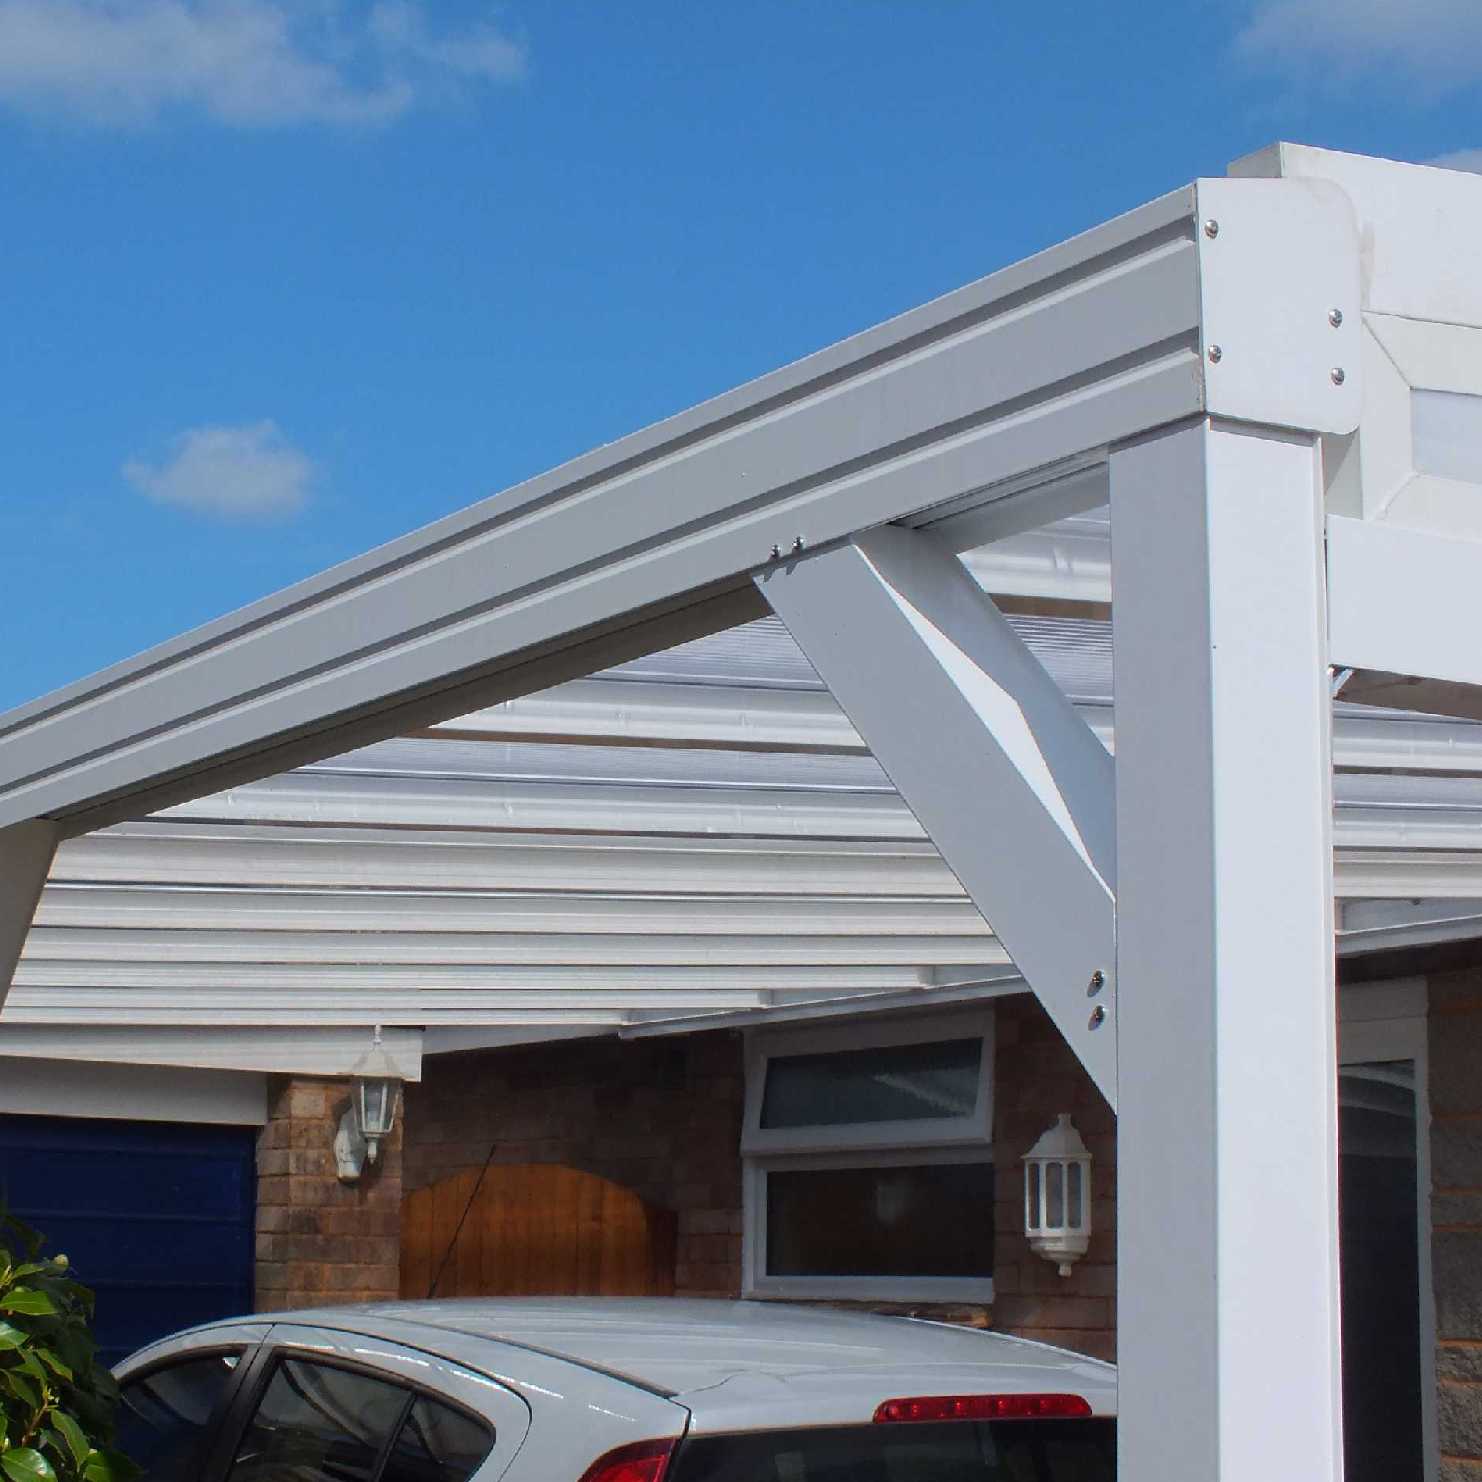 Buy Omega Smart Lean-To Canopy, White with 16mm Polycarbonate Glazing - 6.3m (W) x 4.5m (P), (4) Supporting Posts online today